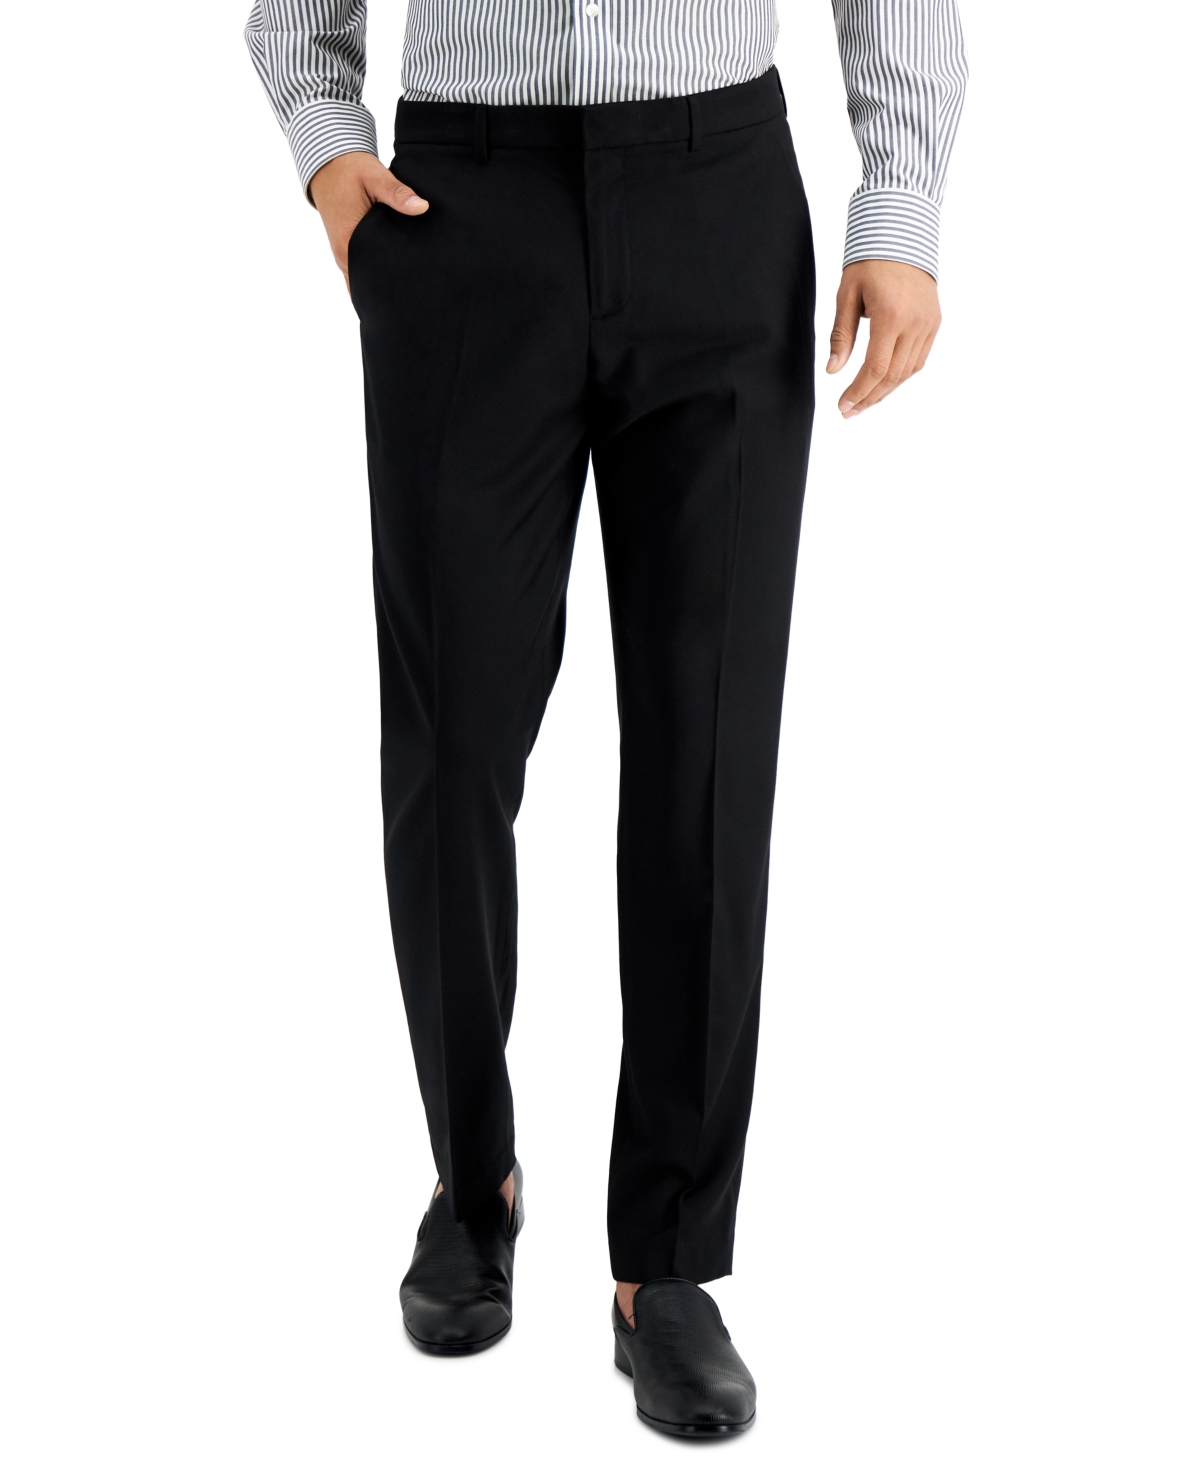 Men's Slim-Fit Non-Iron Performance Stretch Heathered Dress Pants - Total Eclipse